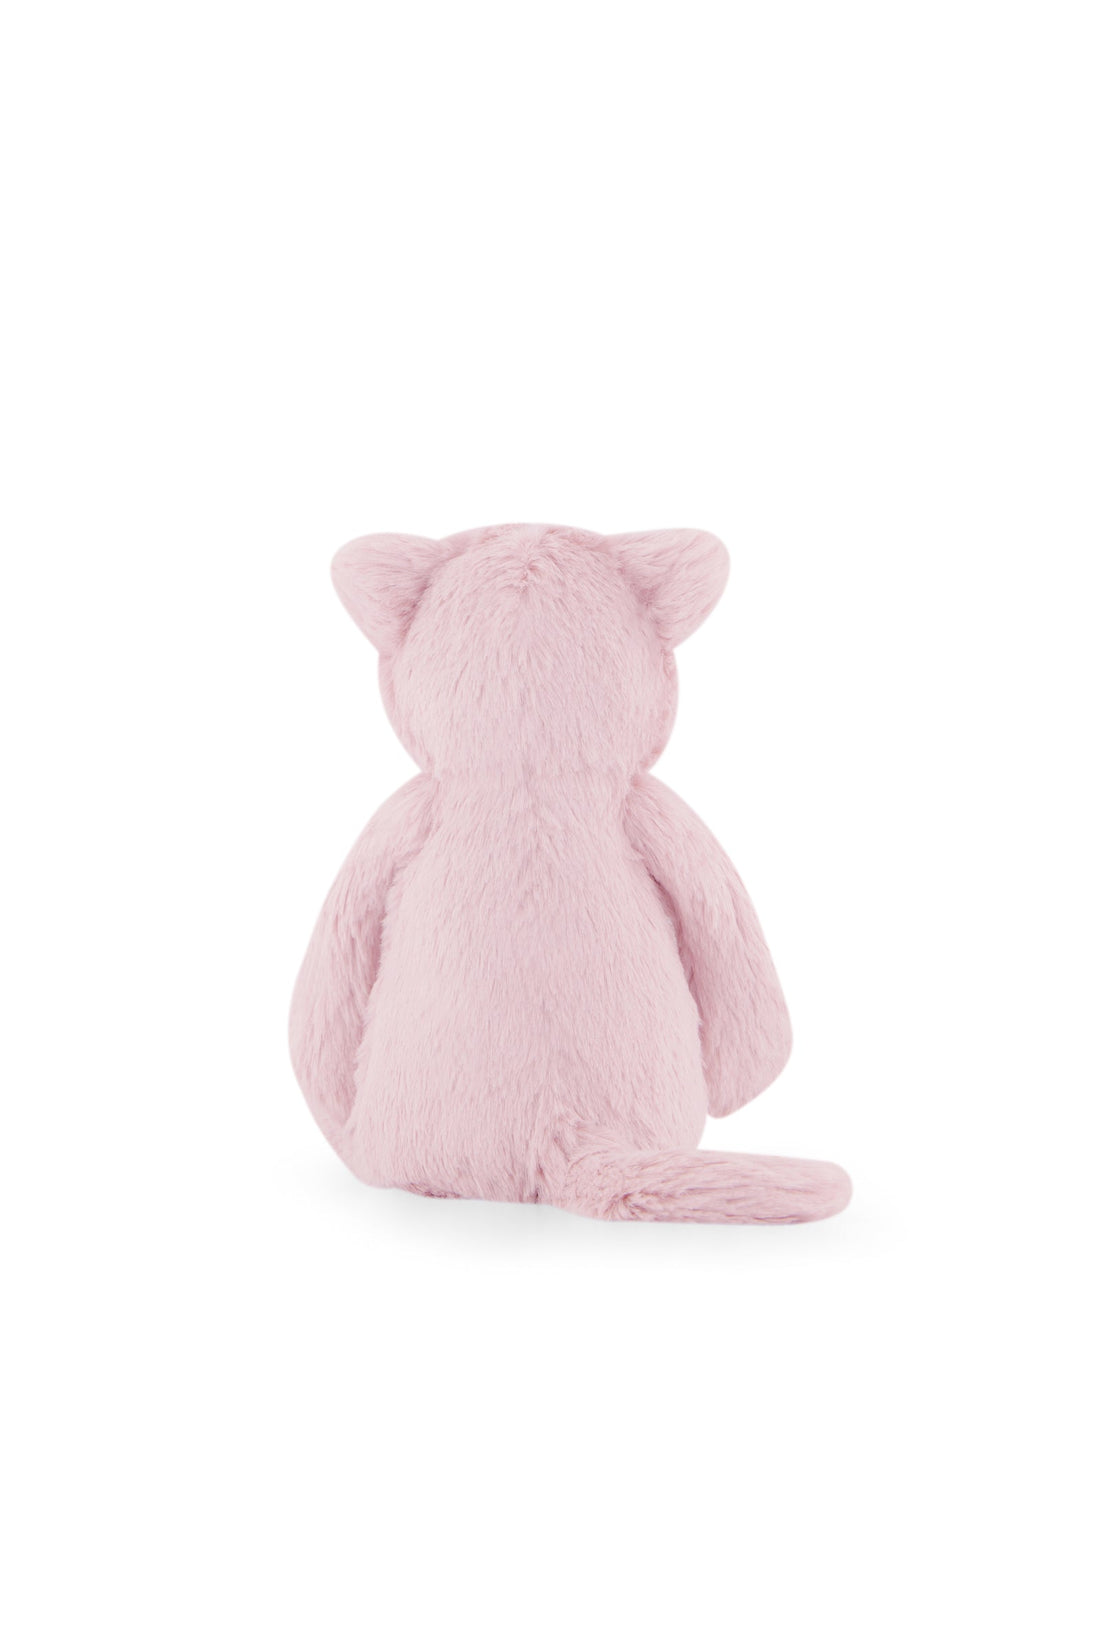 Snuggle Bunnies - Elsie the Kitty - Powder Pink Childrens Toy from Jamie Kay USA